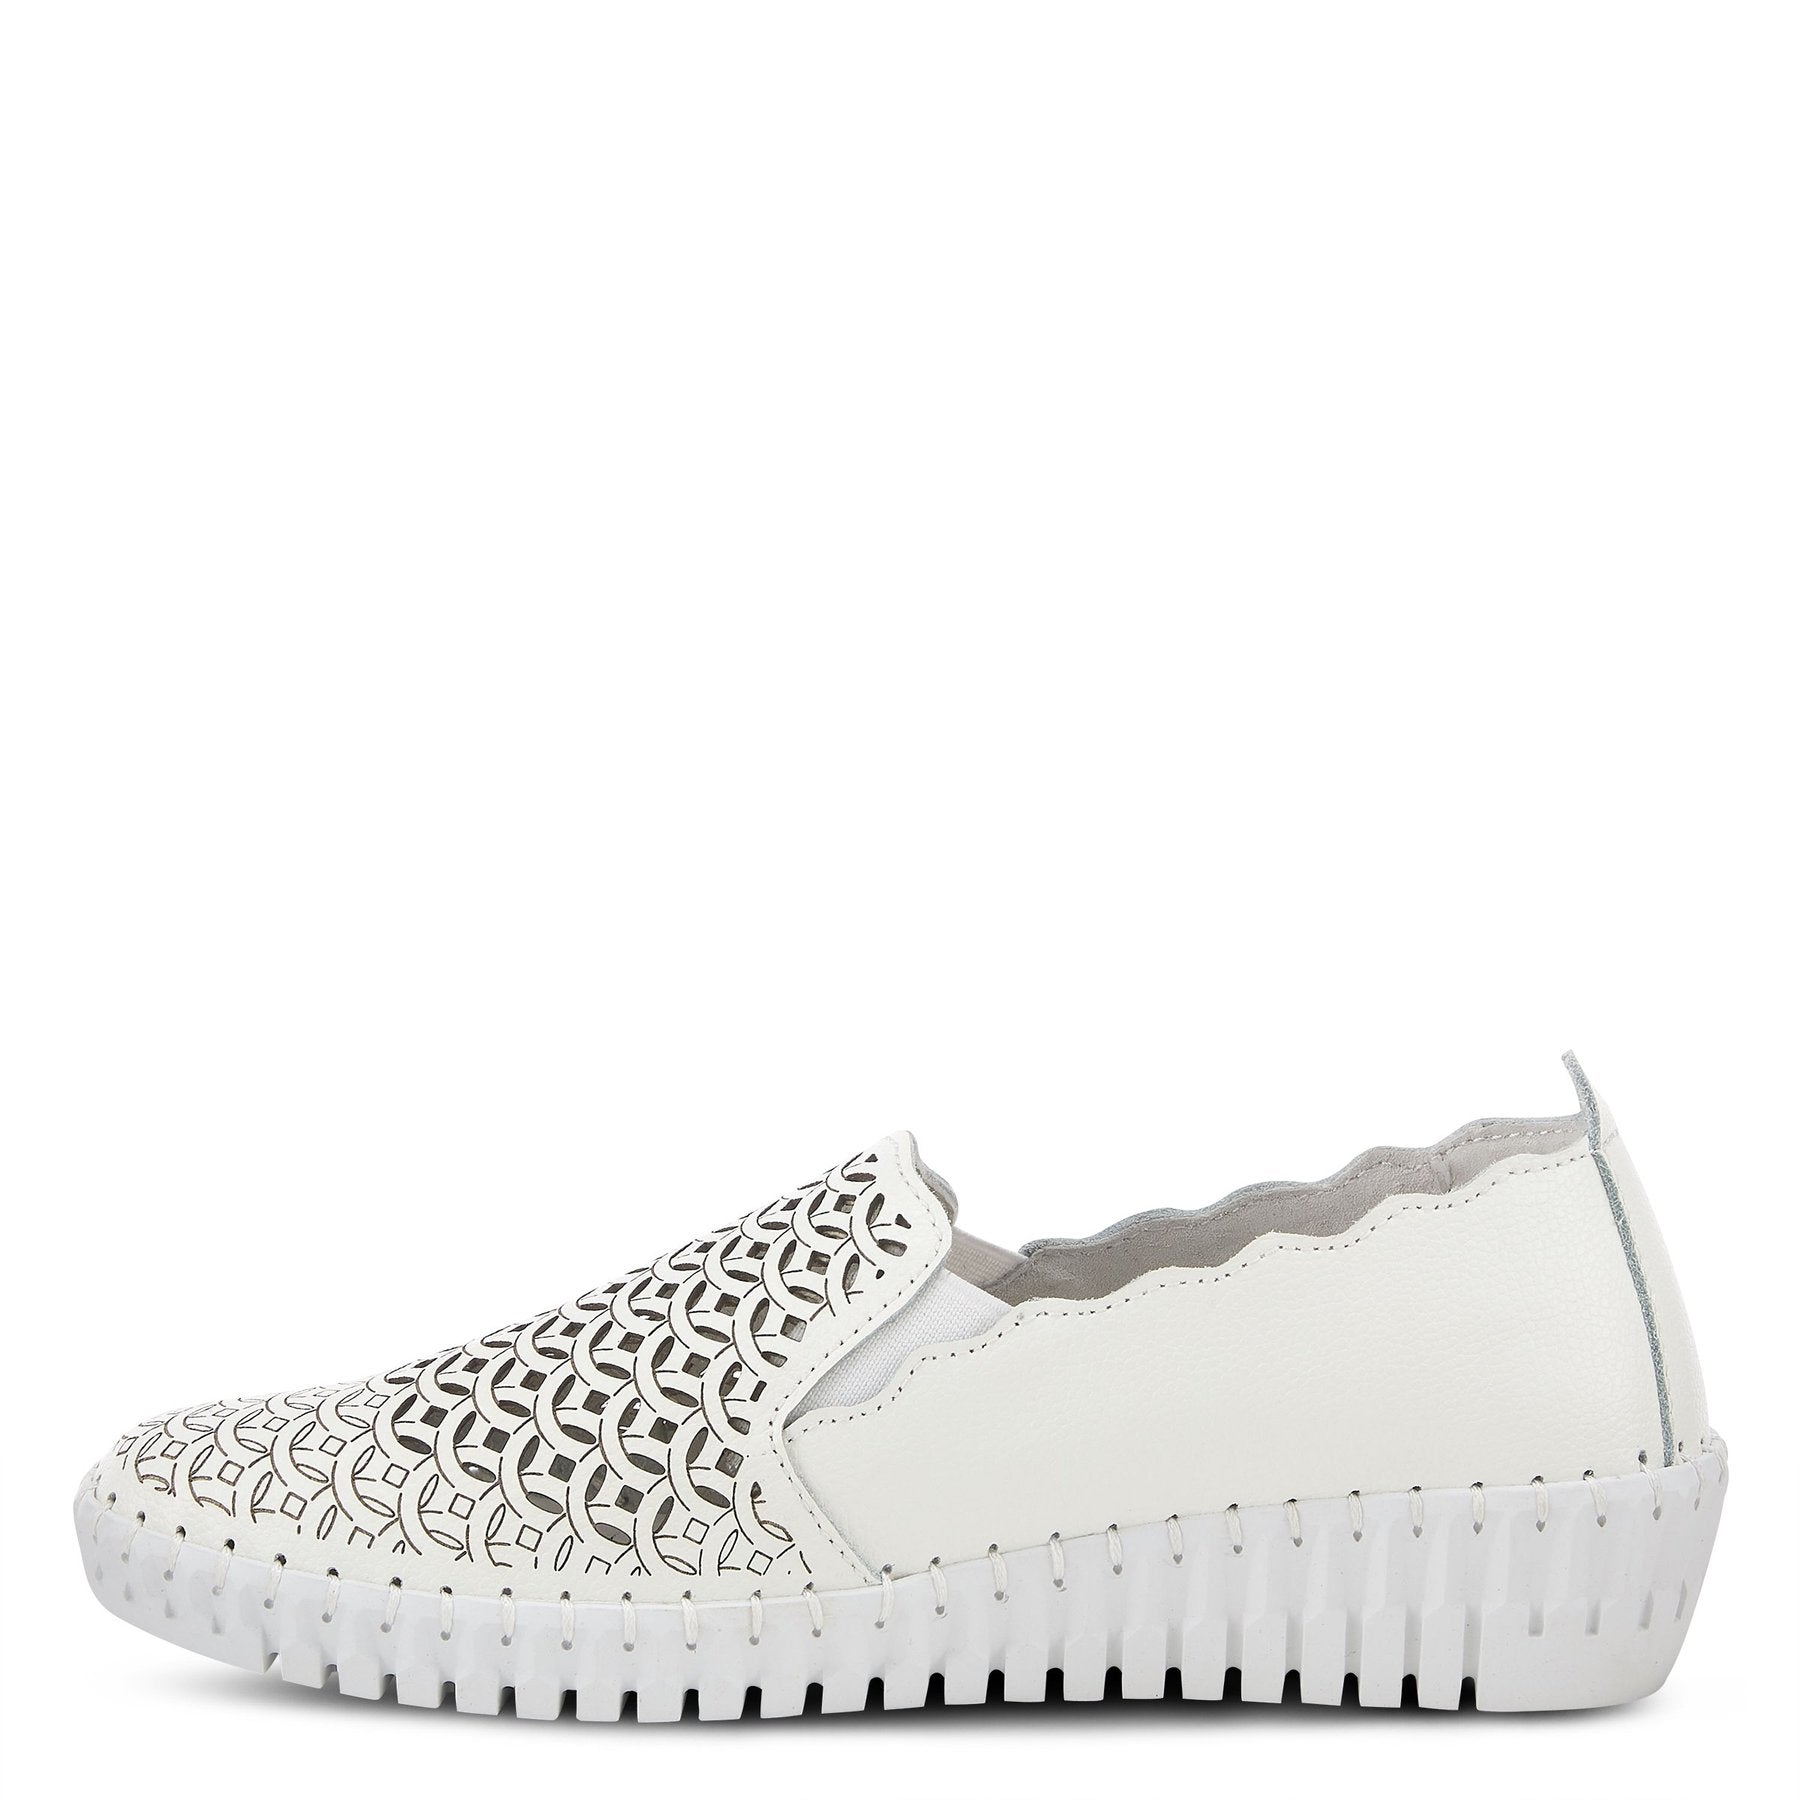 Inner side view of the spring step sasze sneaker. This all white slip on sneaker has a wedge heel, scalloped/wavy edges, and a laser-cut designed front.